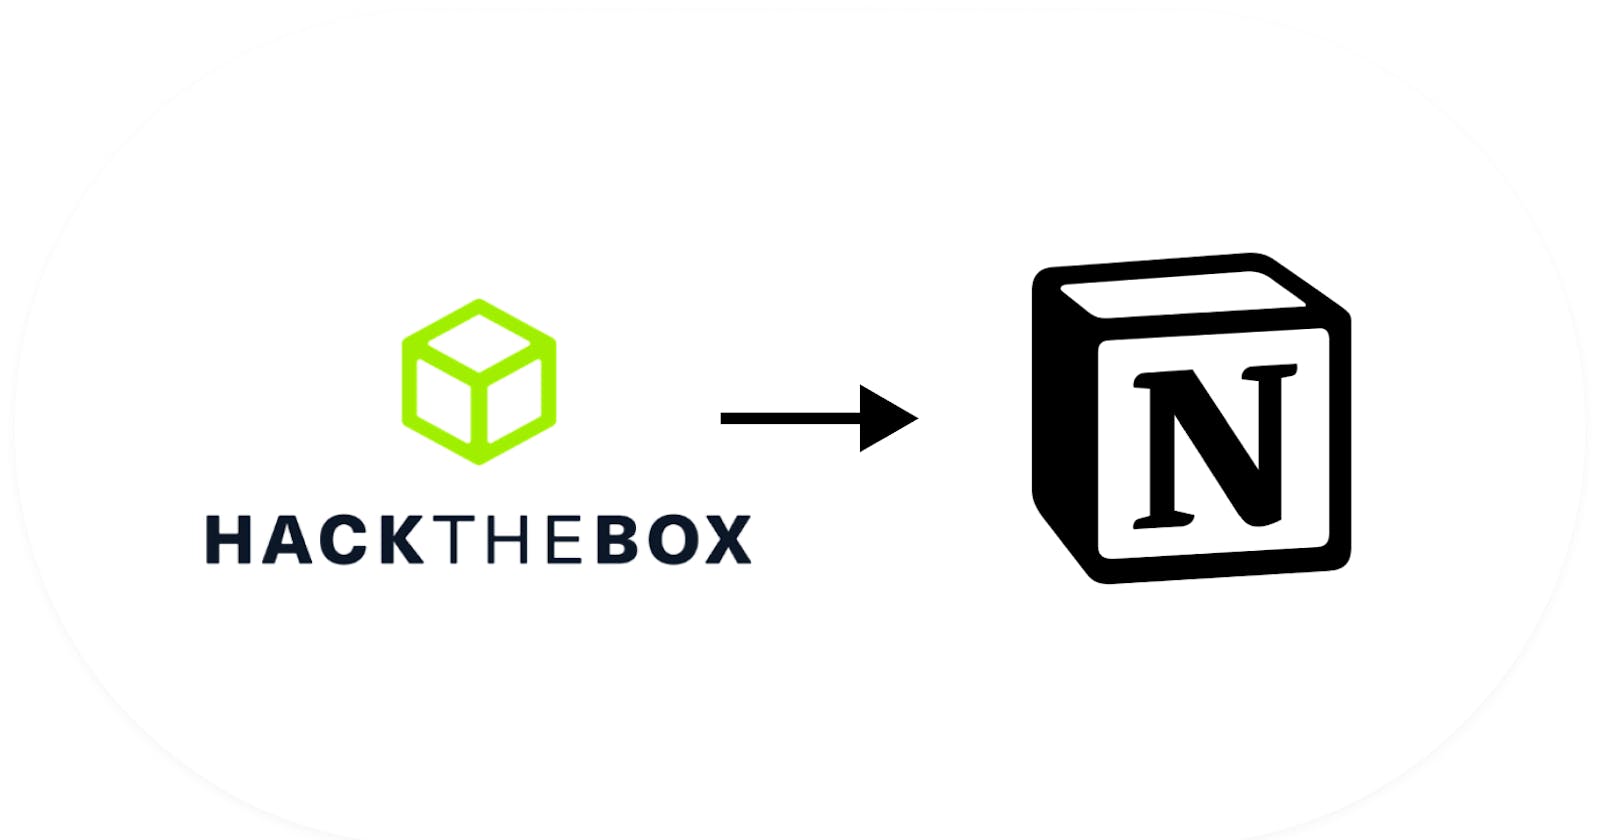 Hack The Box To Notion